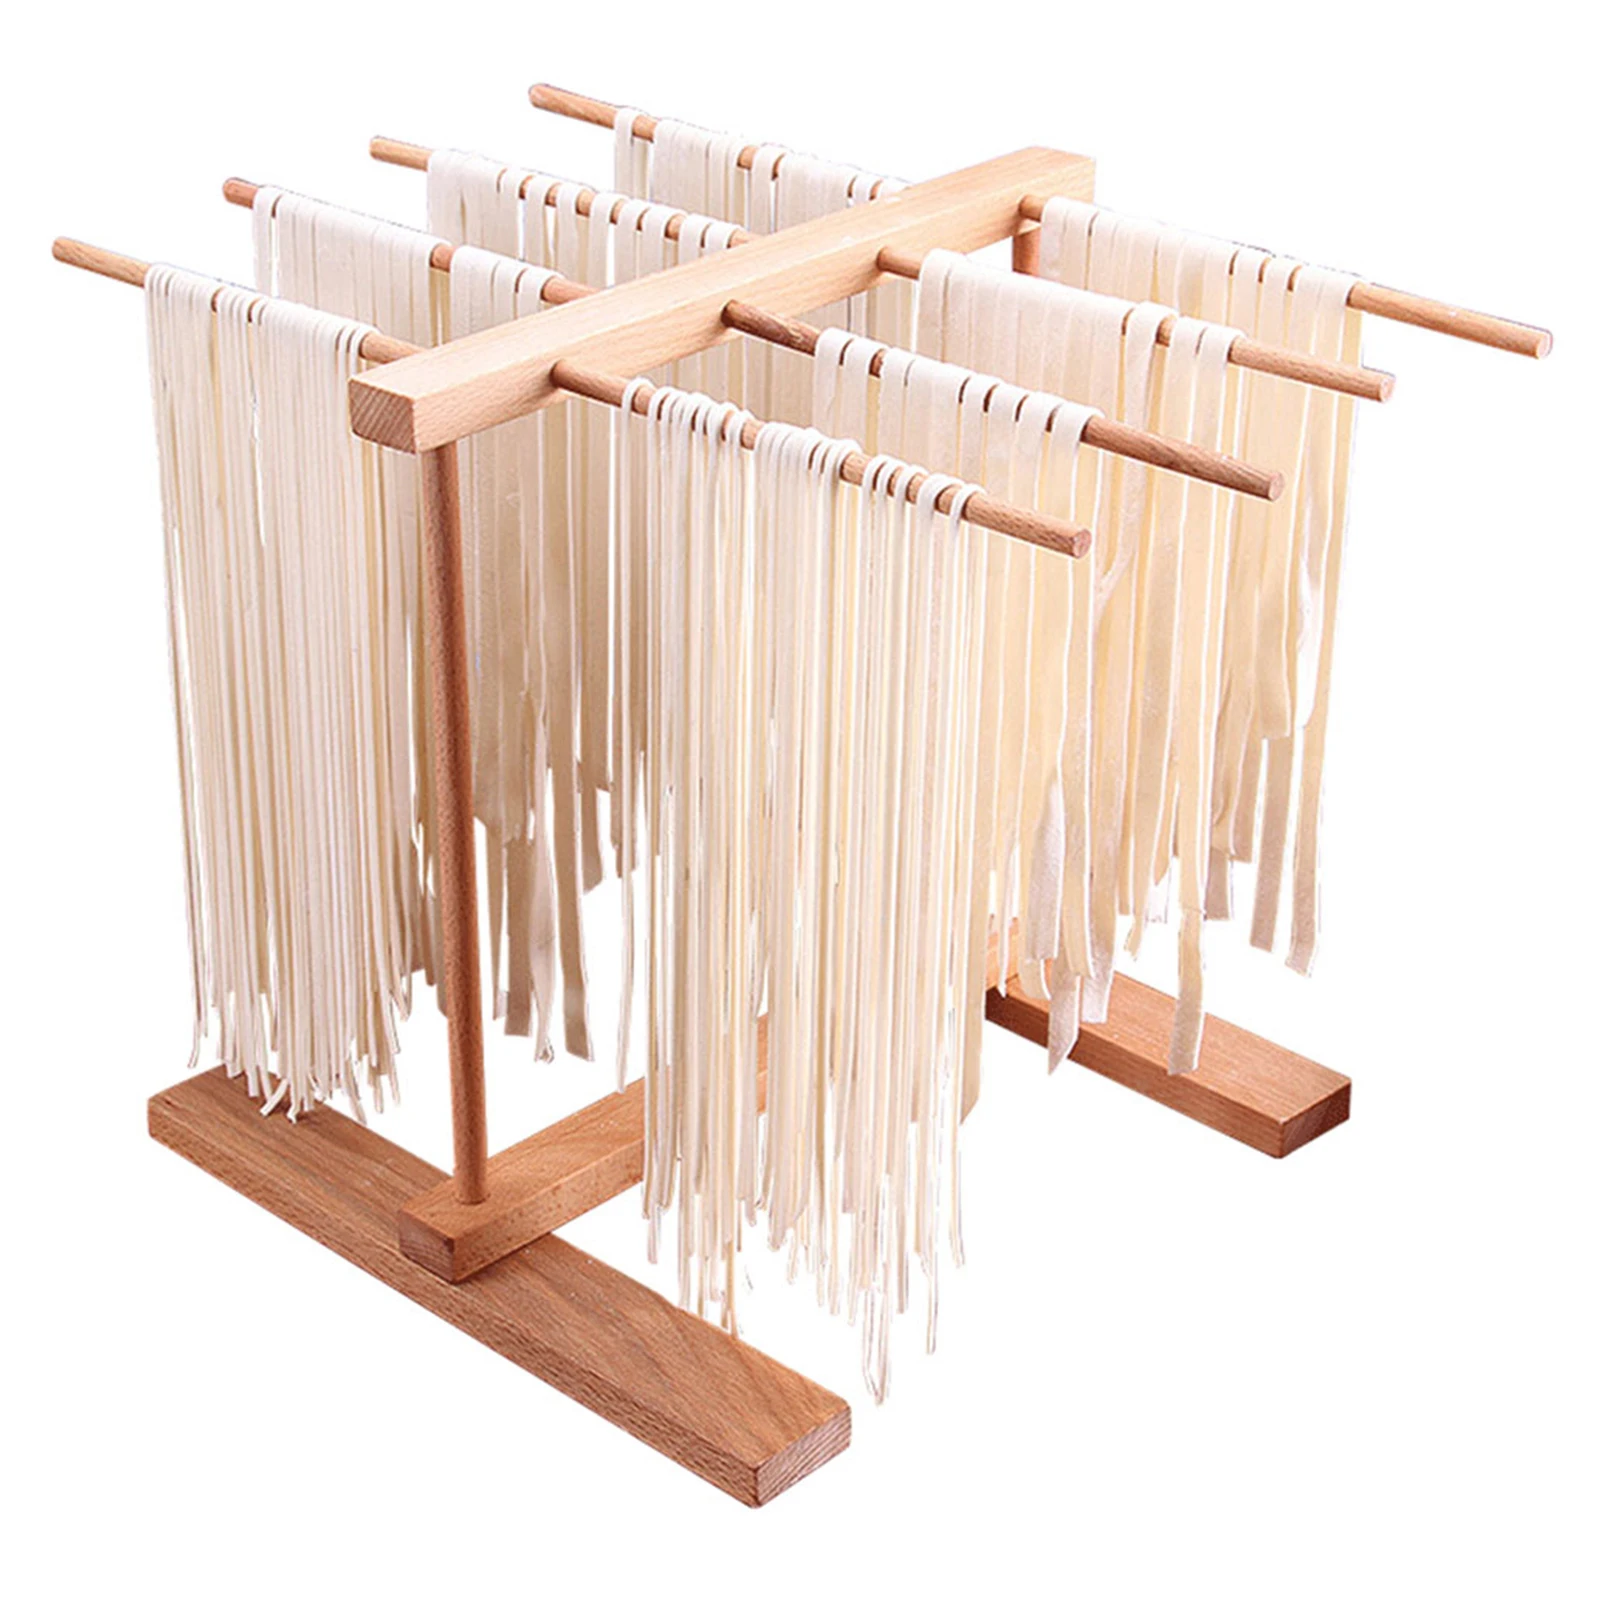 

Multi Function Pasta Drying Holder Stand Noodle Dryer Accessories Storage Rack Handmade Wooden Detachable Kitchen Linguine Tools